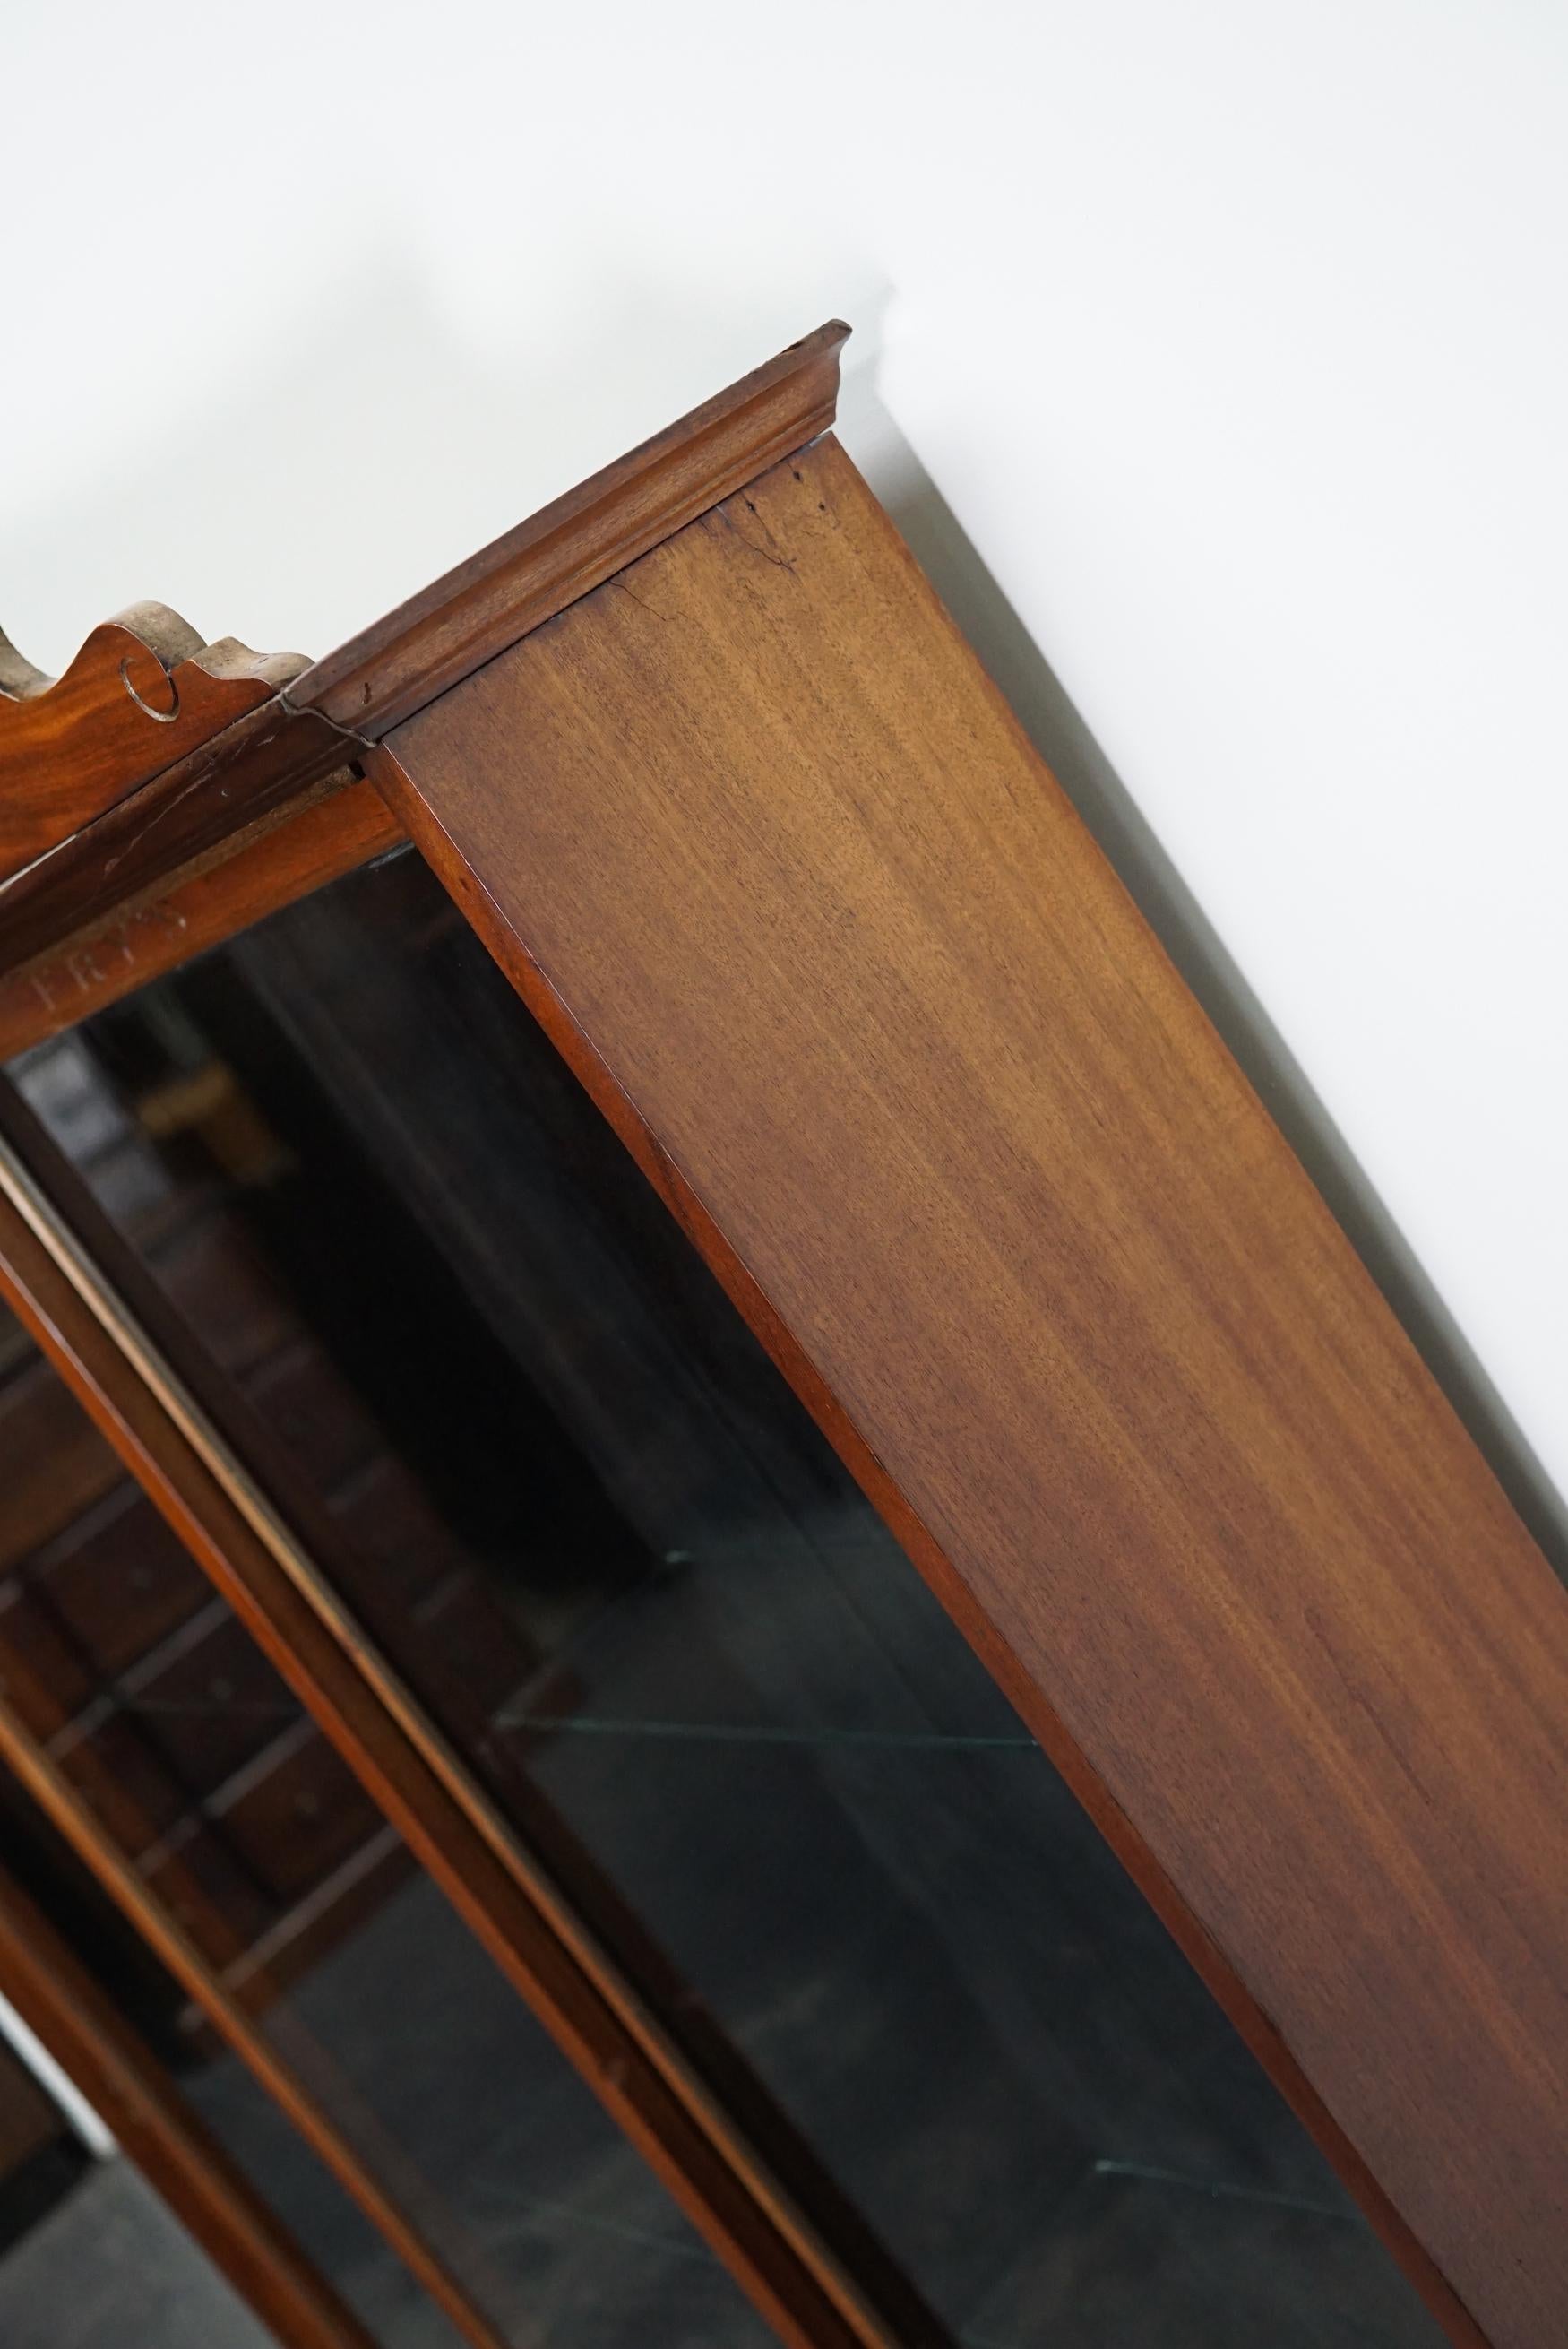 Fry's Chocolates Mahogany Shop Display Cabinet or Vitrine, Late 19th Century For Sale 5